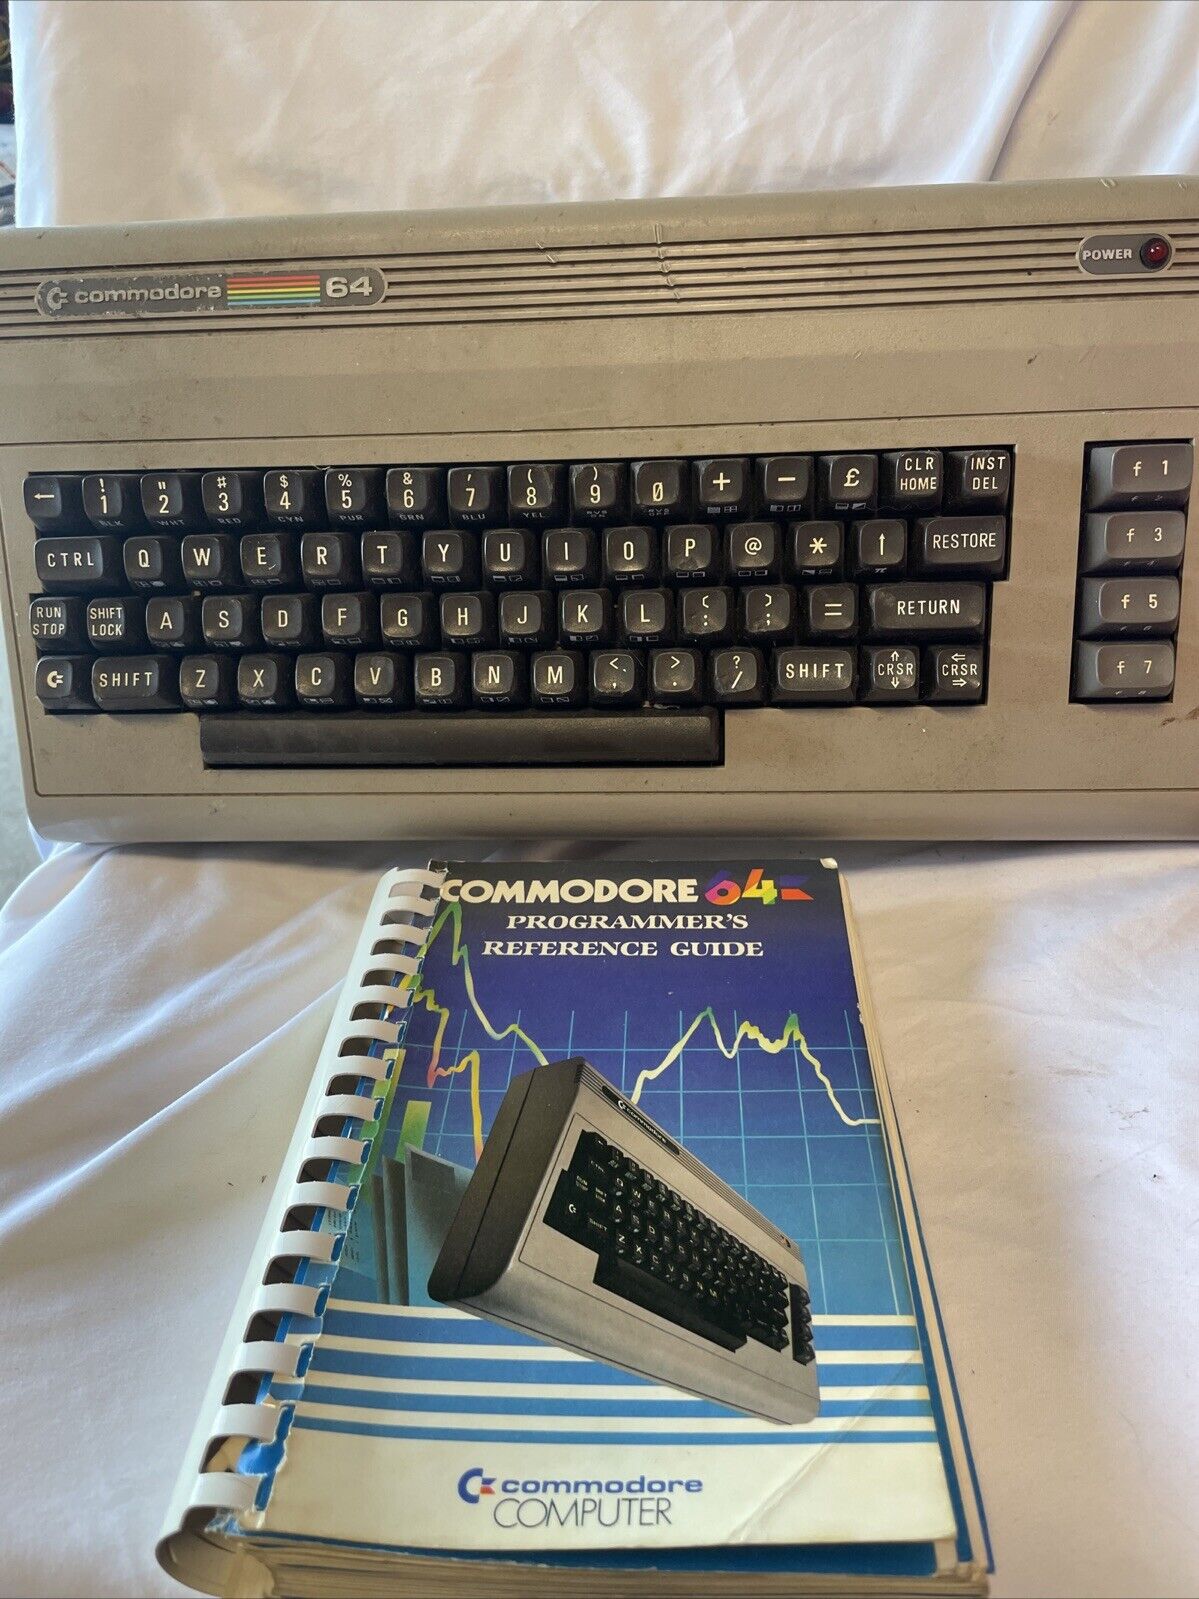 Retro Commodore 64 Computer UnTested C64 with Programmers Reference Guide